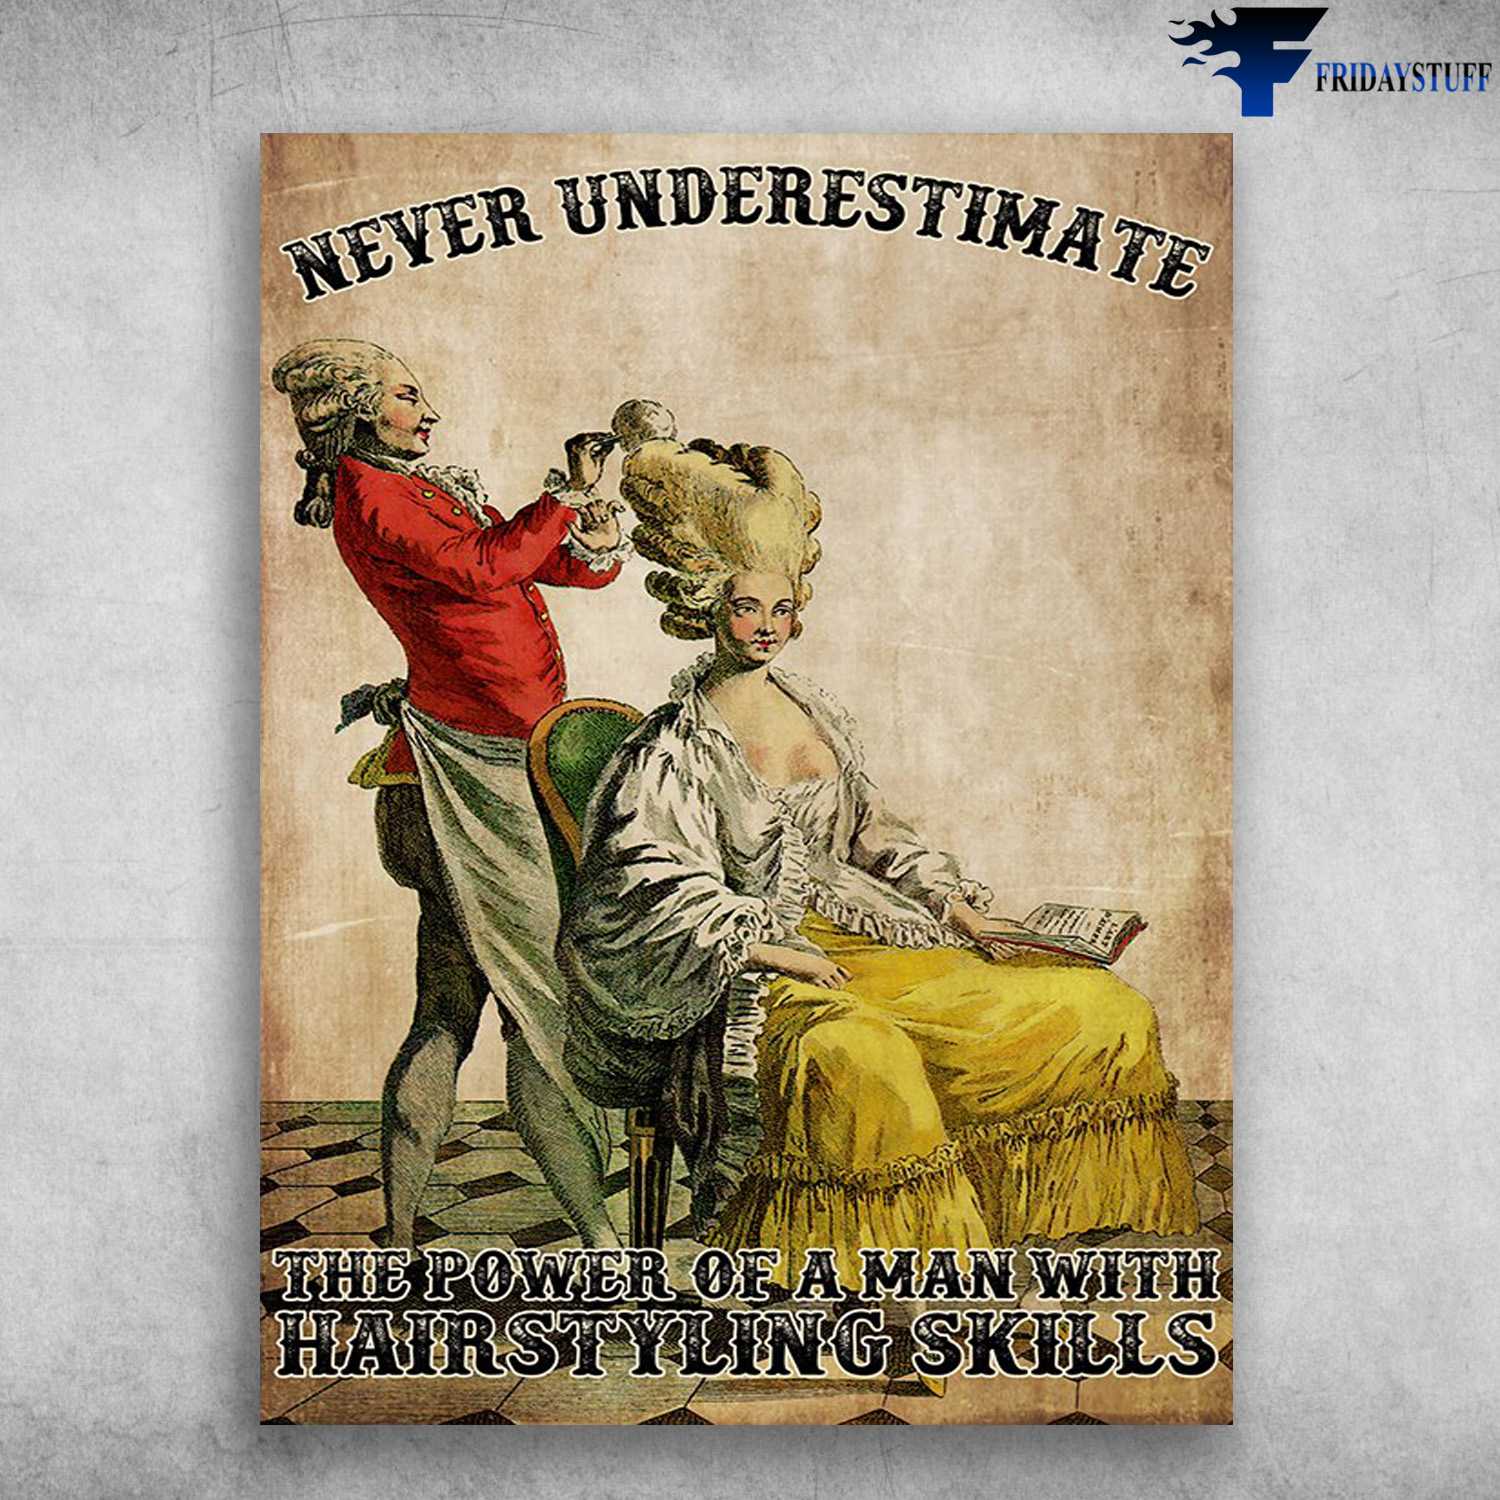 Hairdressers Poster - Never Underestimate, The Fower Of A Man With, Hairstyling Skills